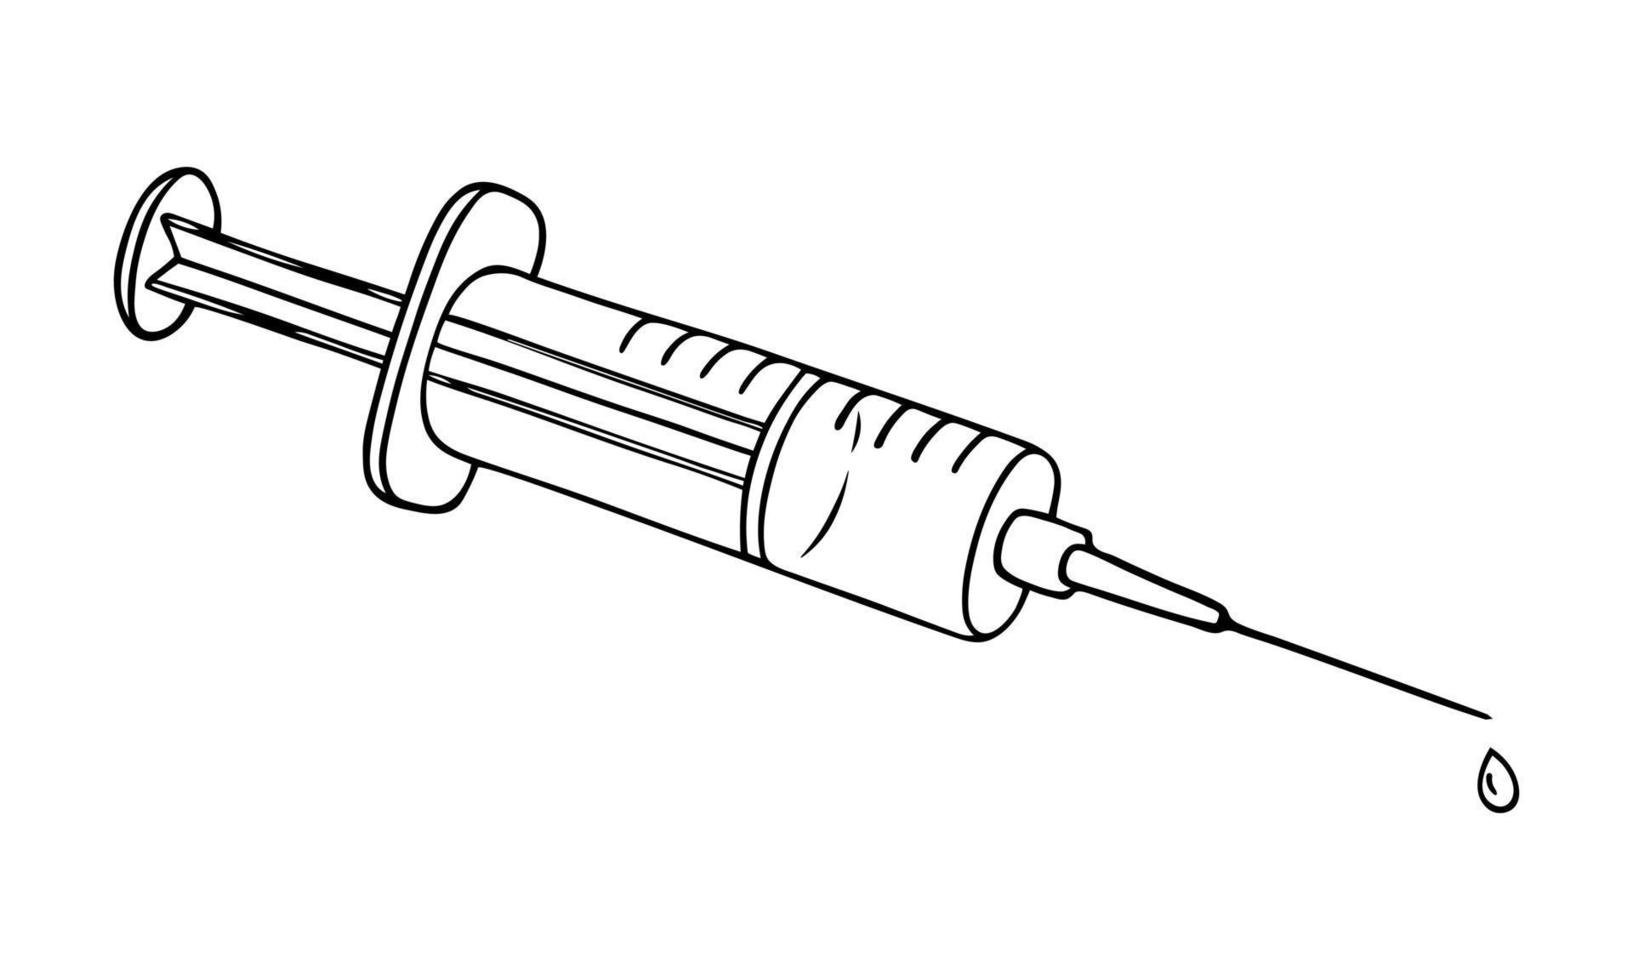 Syringe vector hand drawn outline doodle icon. Covid19 Coronavirus vaccine. Medical injection syringe as using drugs or hospital service concept. For print, web, design, decor, logo.